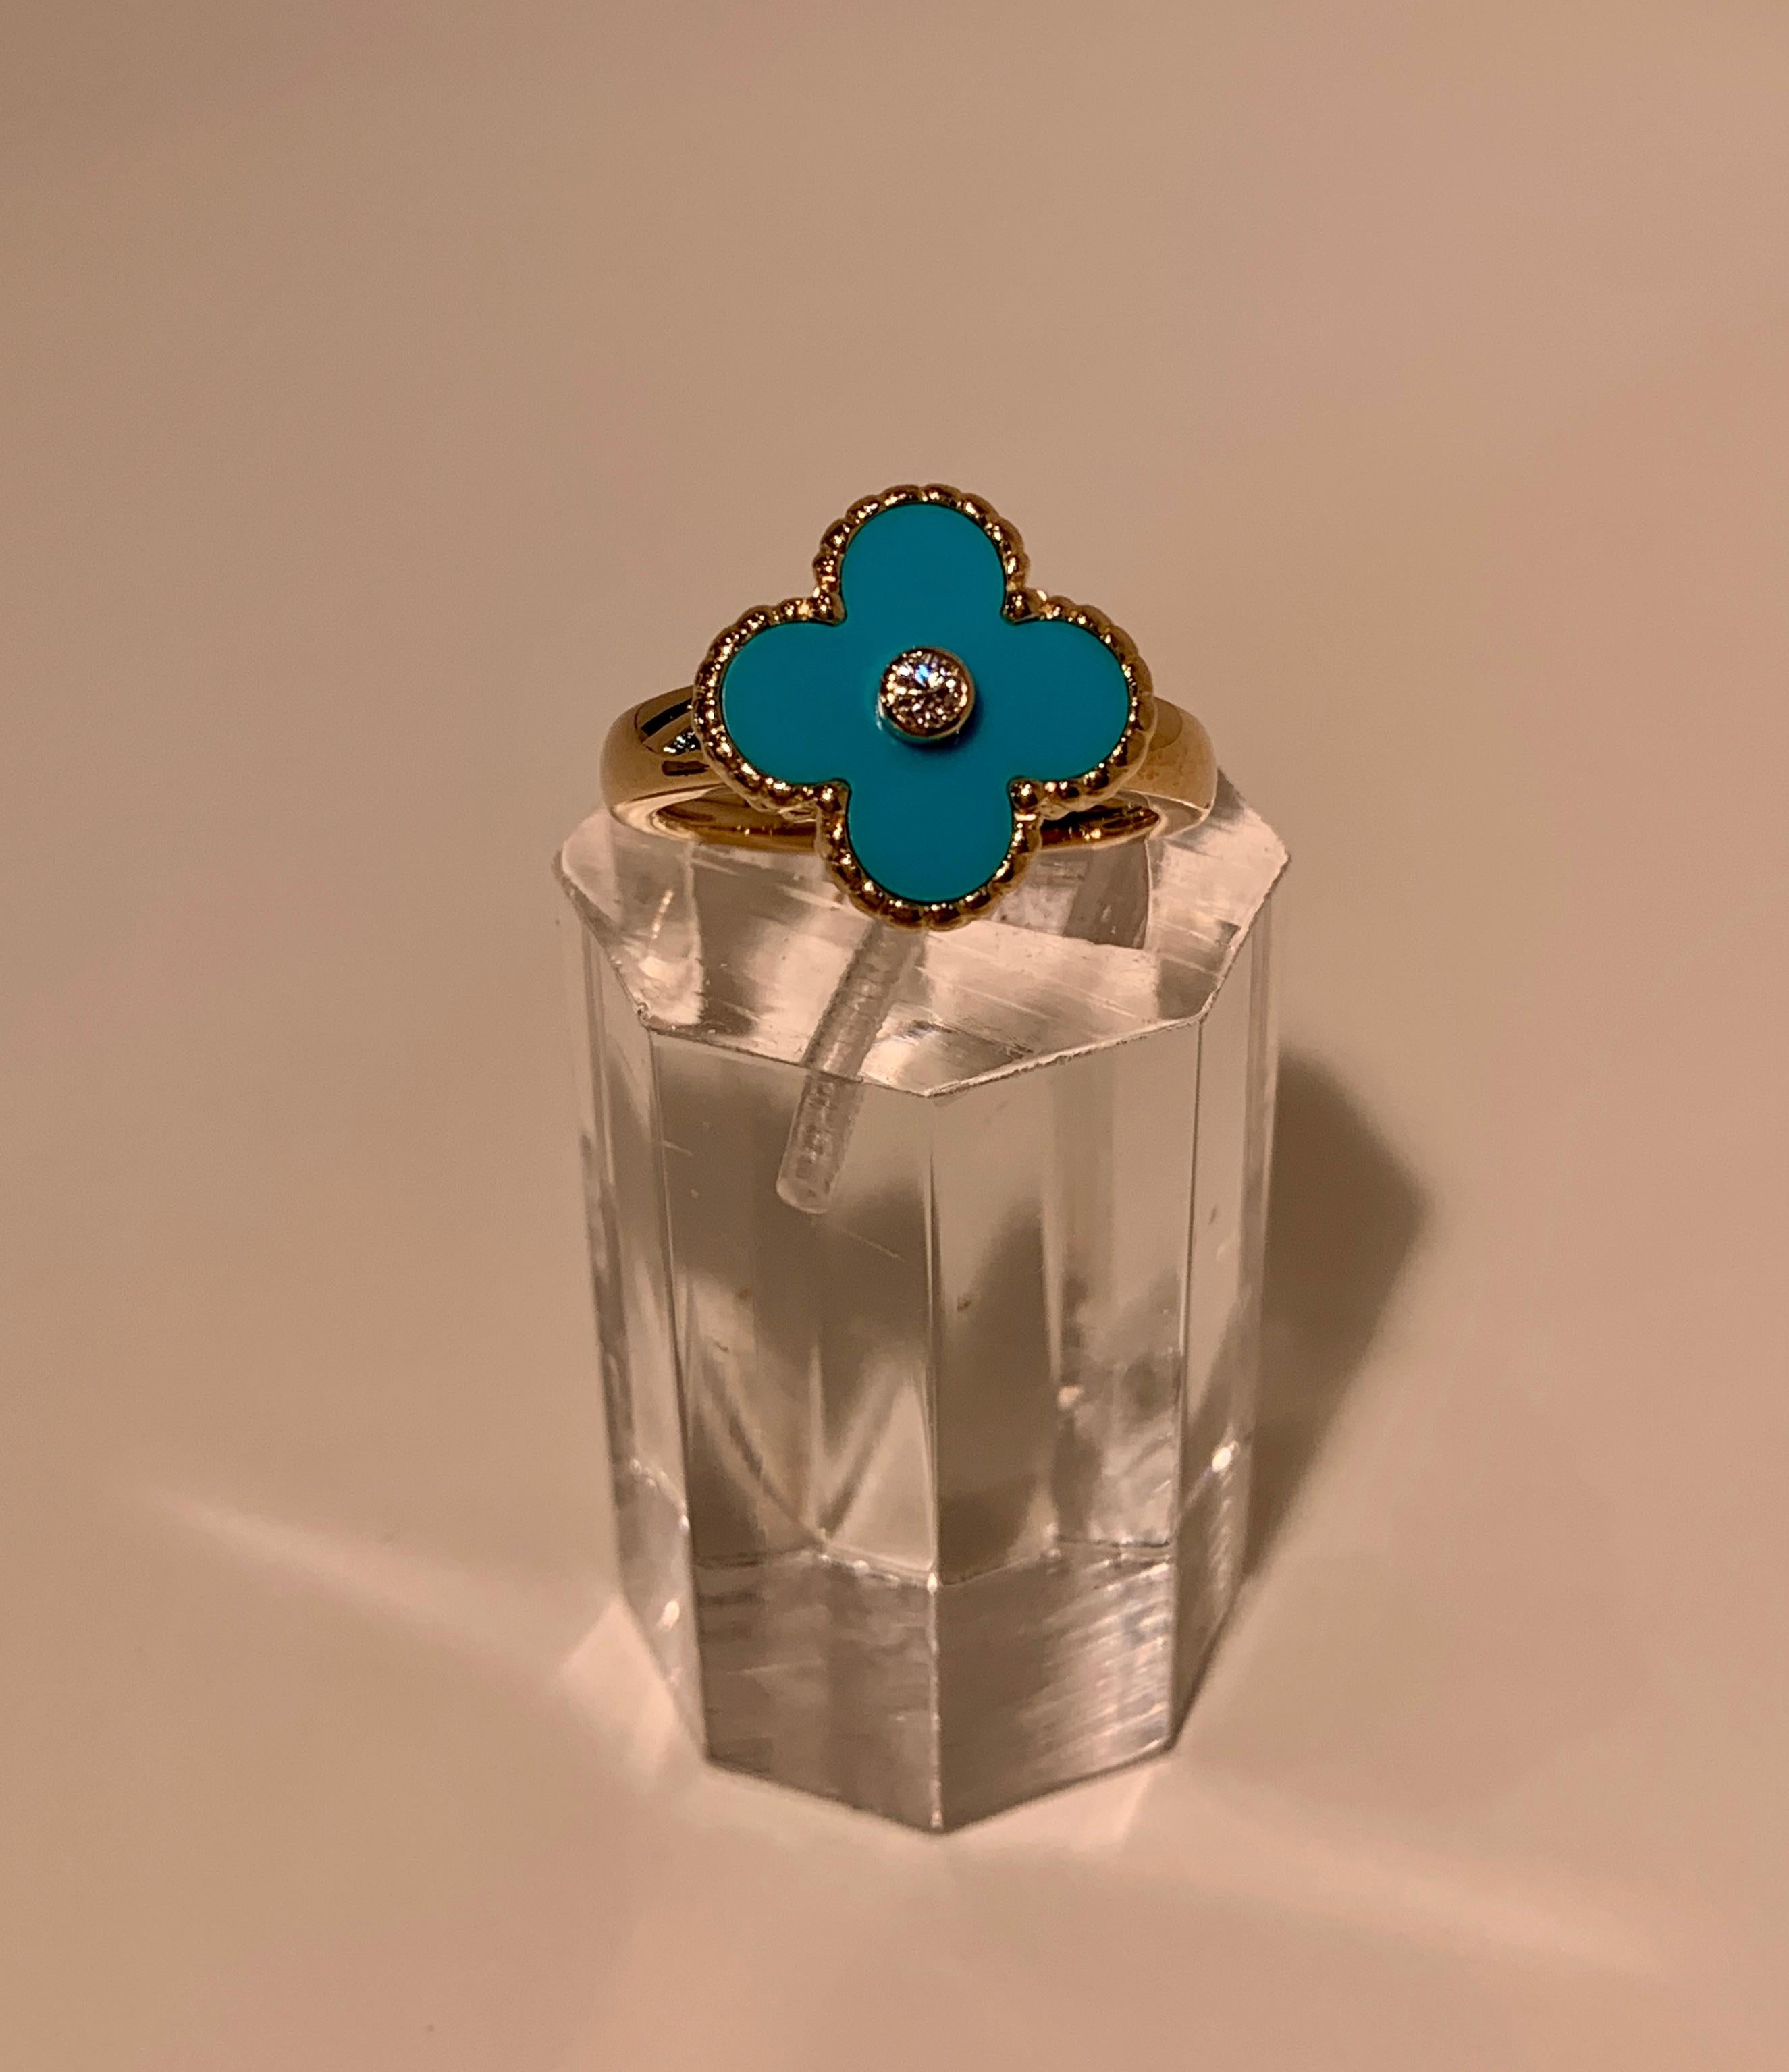 Women's New Van Cleef & Arpels Vintage Alhambra Collection Diamond Turquoise Flower Ring